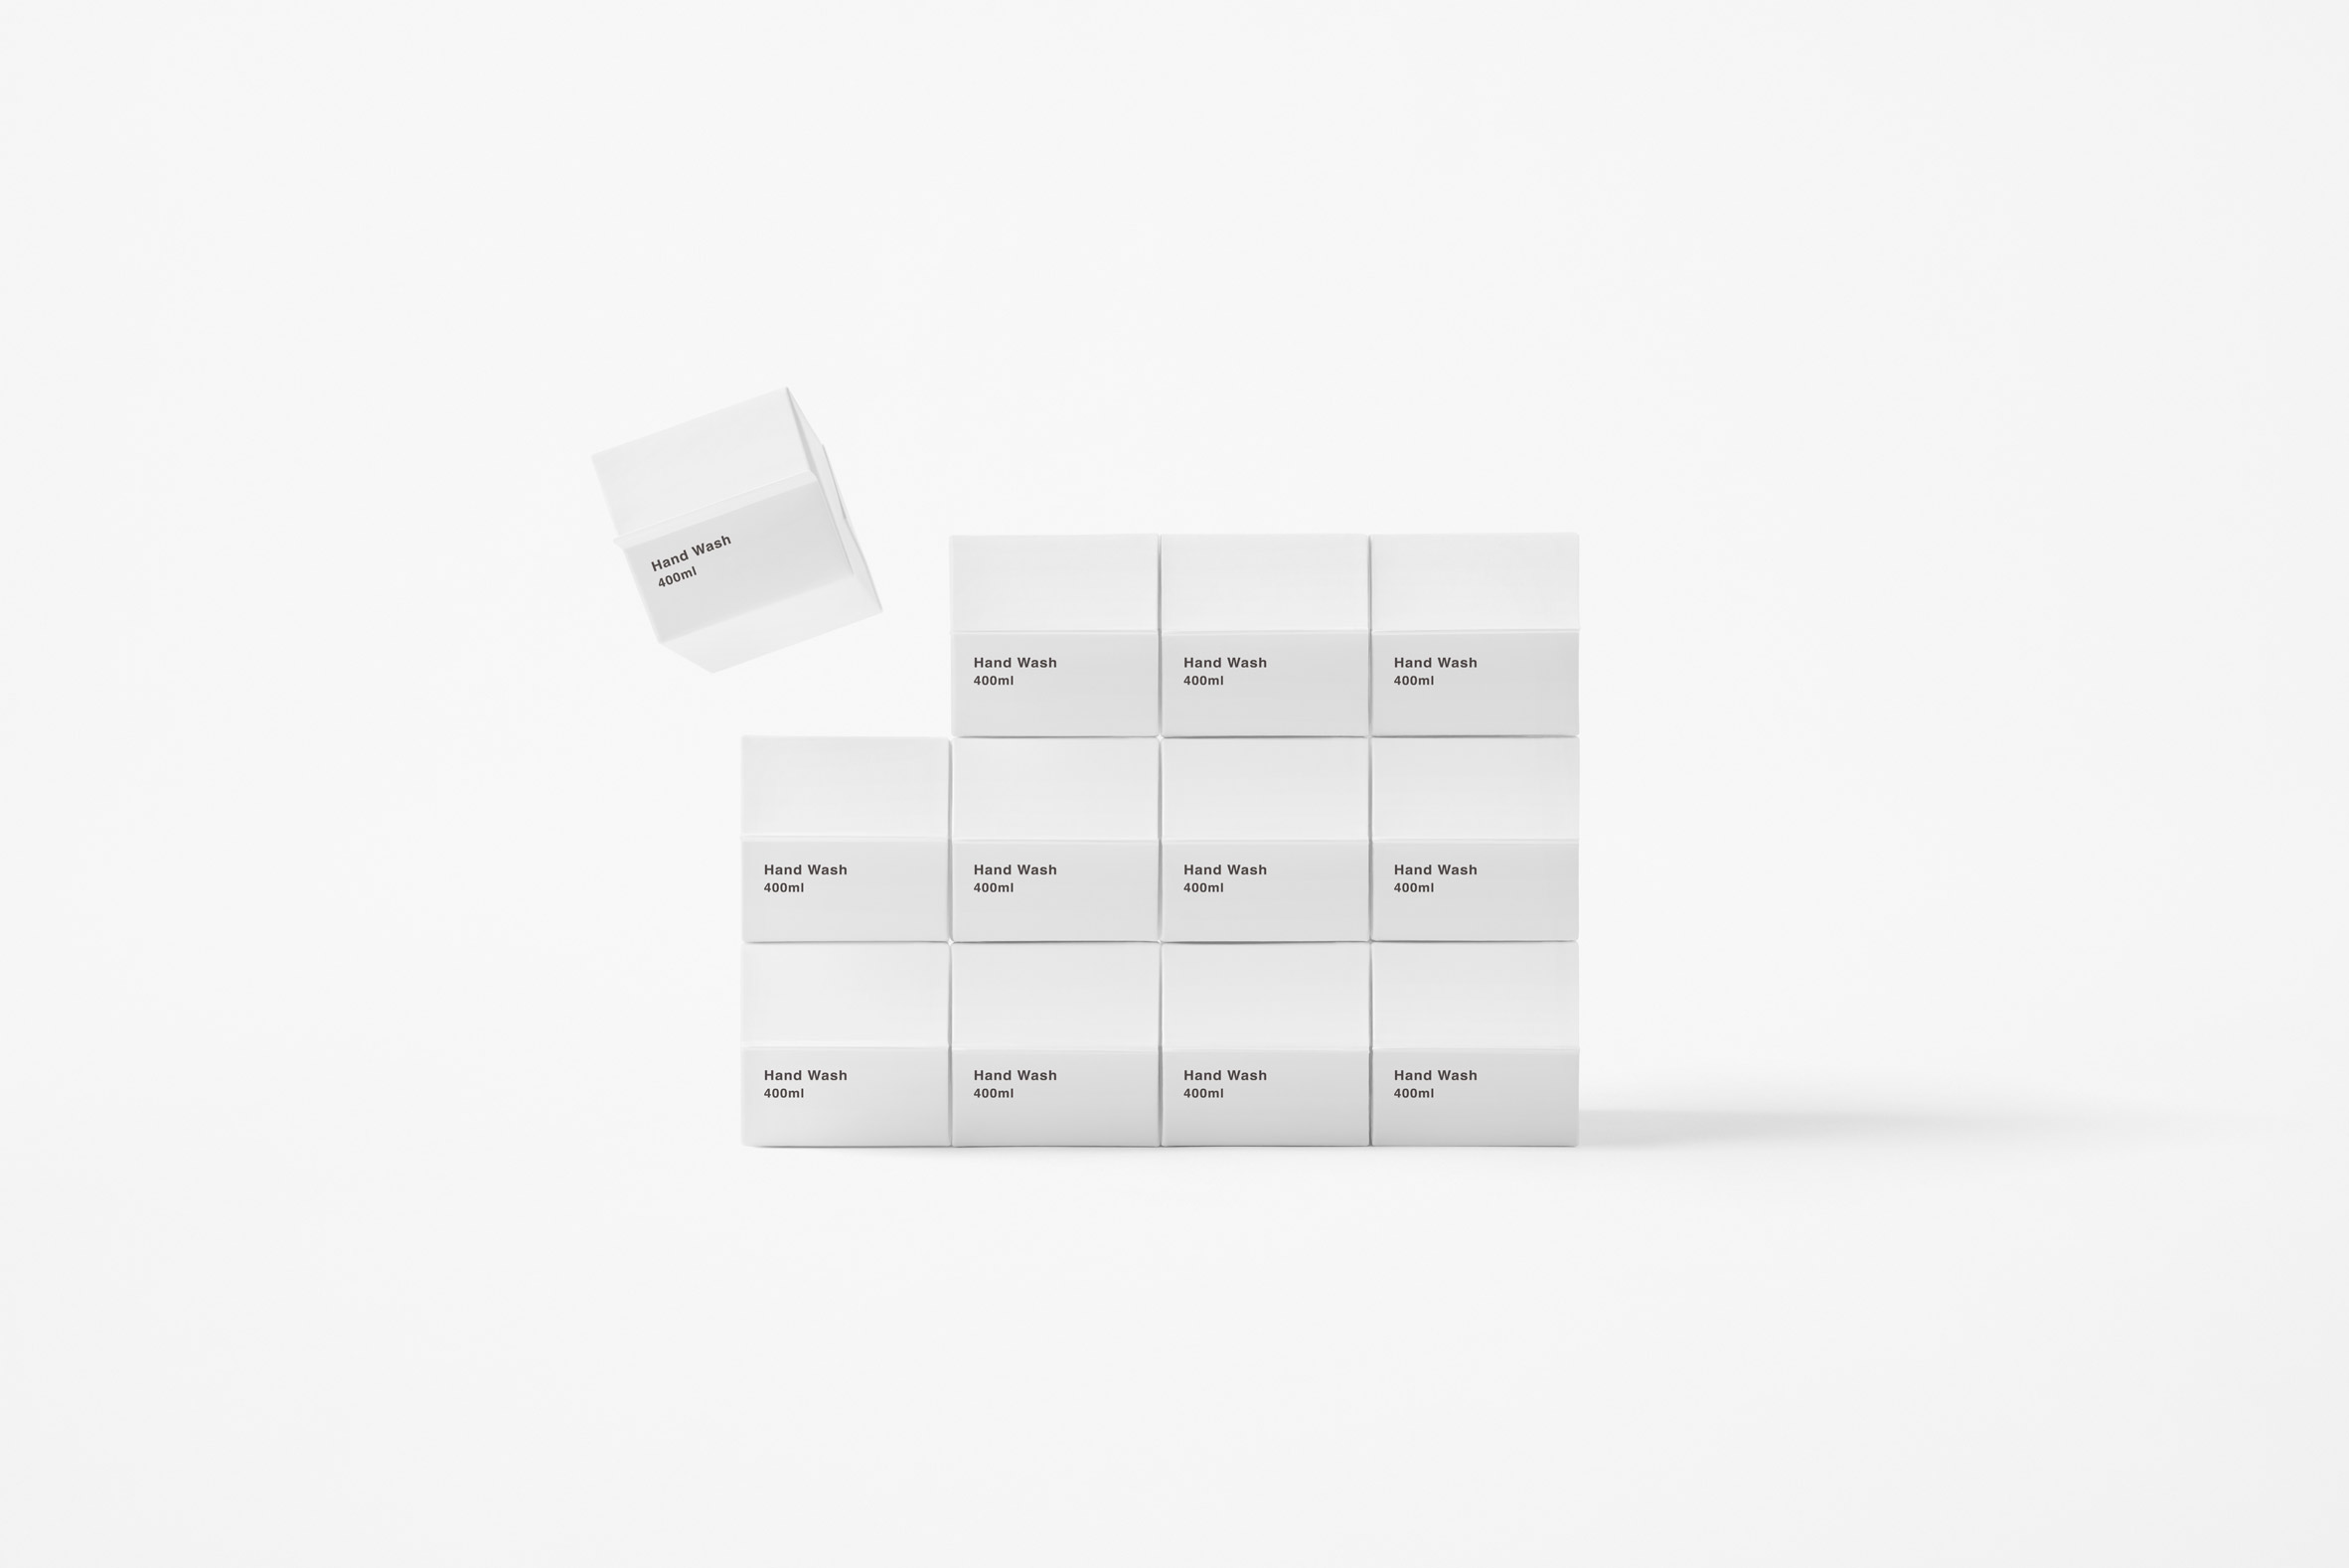 Nendo is a Japanese design firm